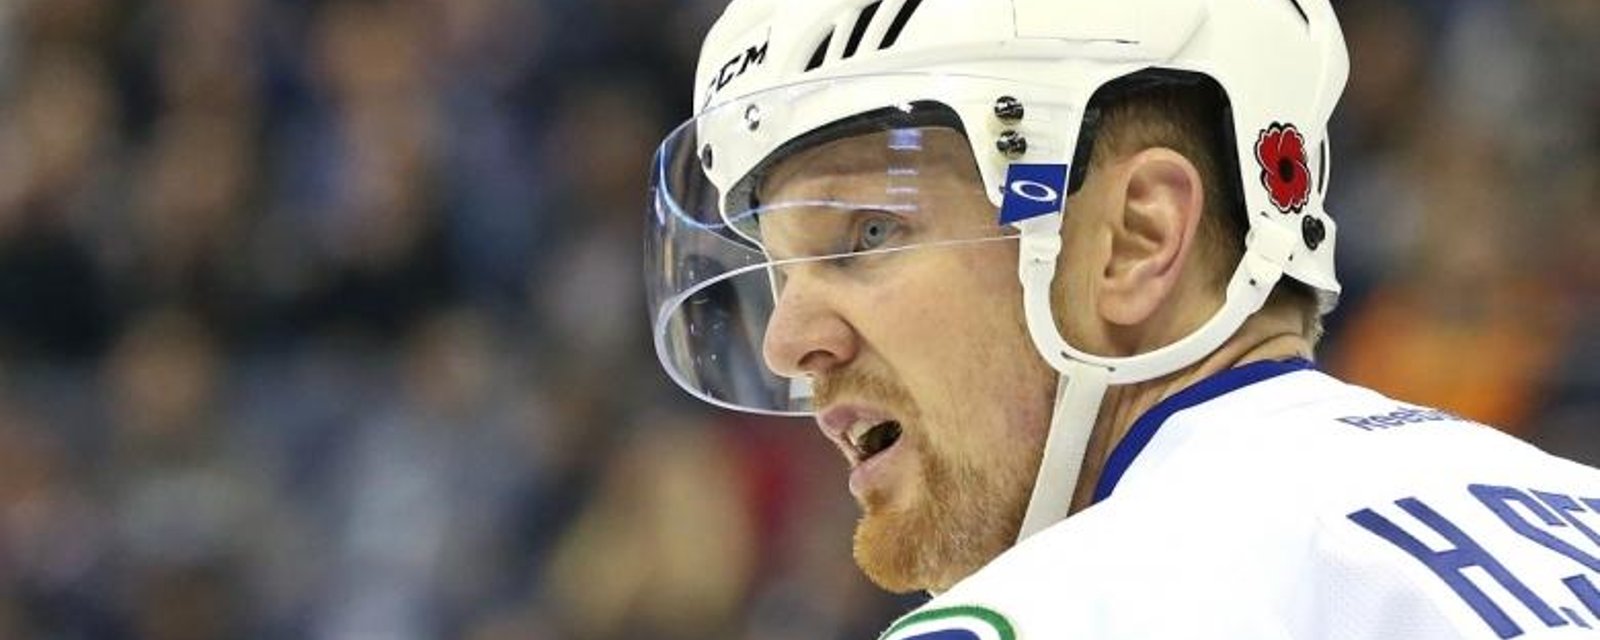 Canucks star Sedin injured after hit from behind.